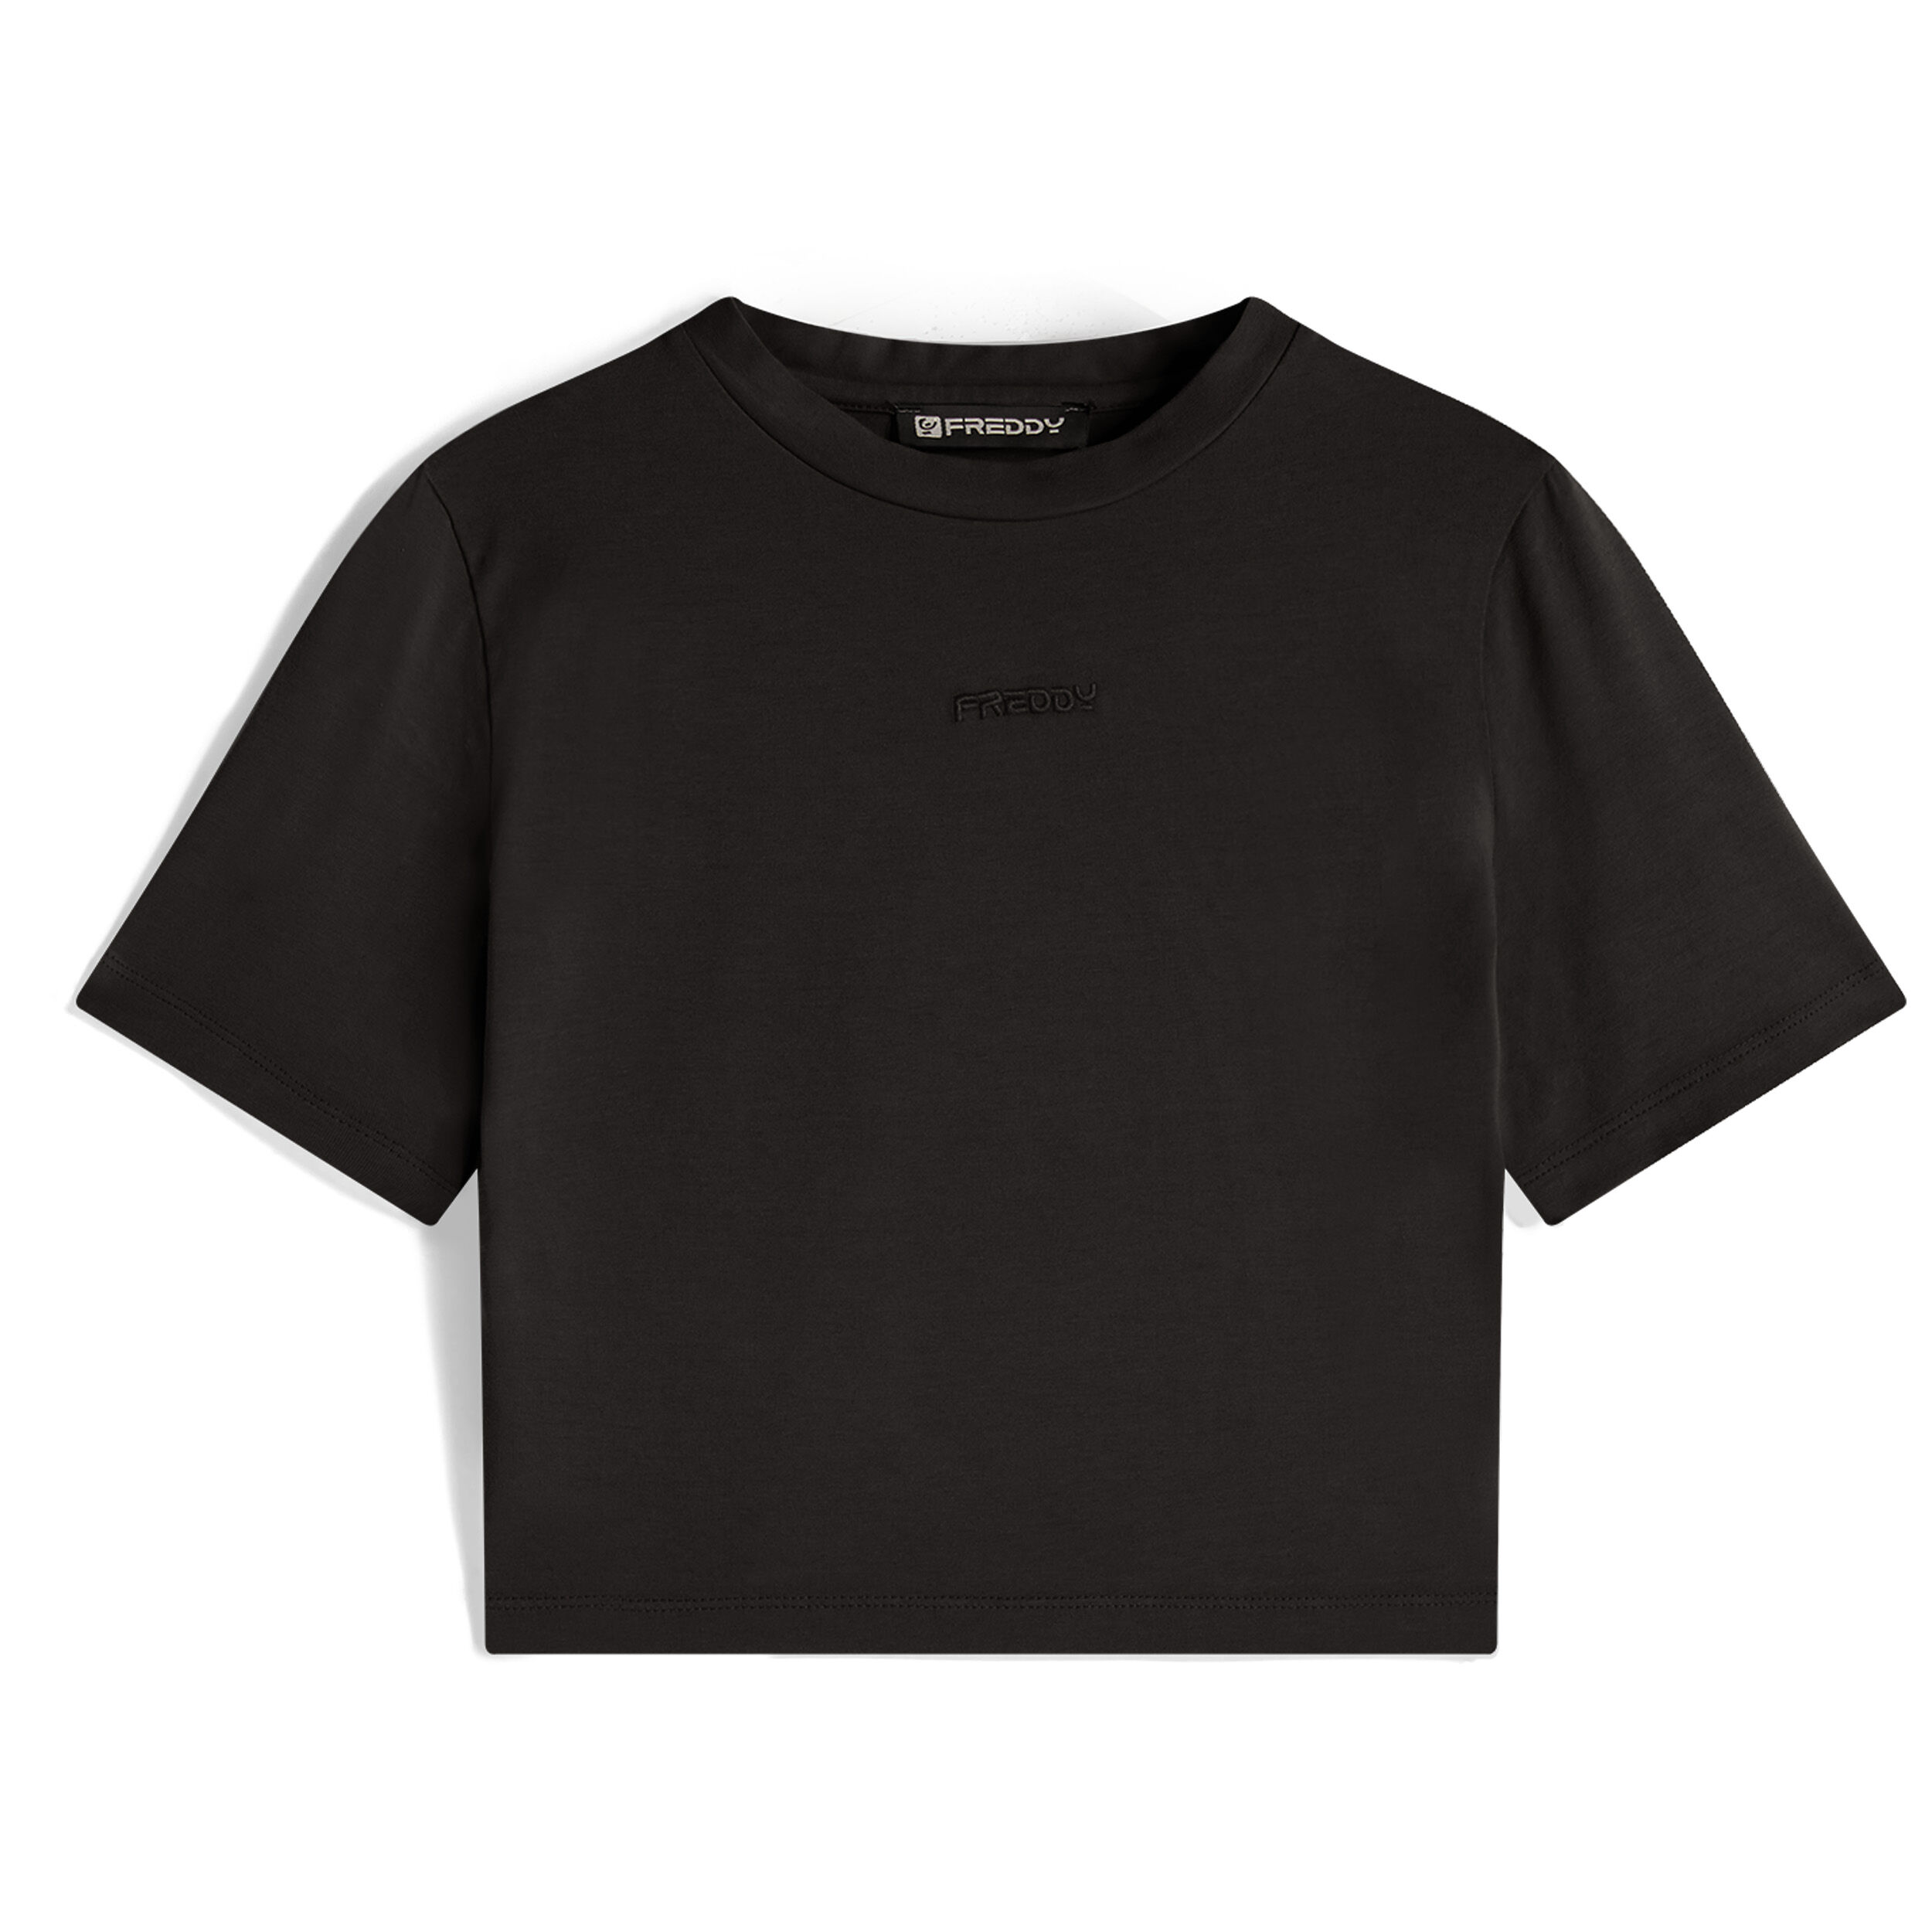 Freddy T-shirt slim fit corta in tessuto jersey tinto capo Black Direct Dyed Donna Extra Small